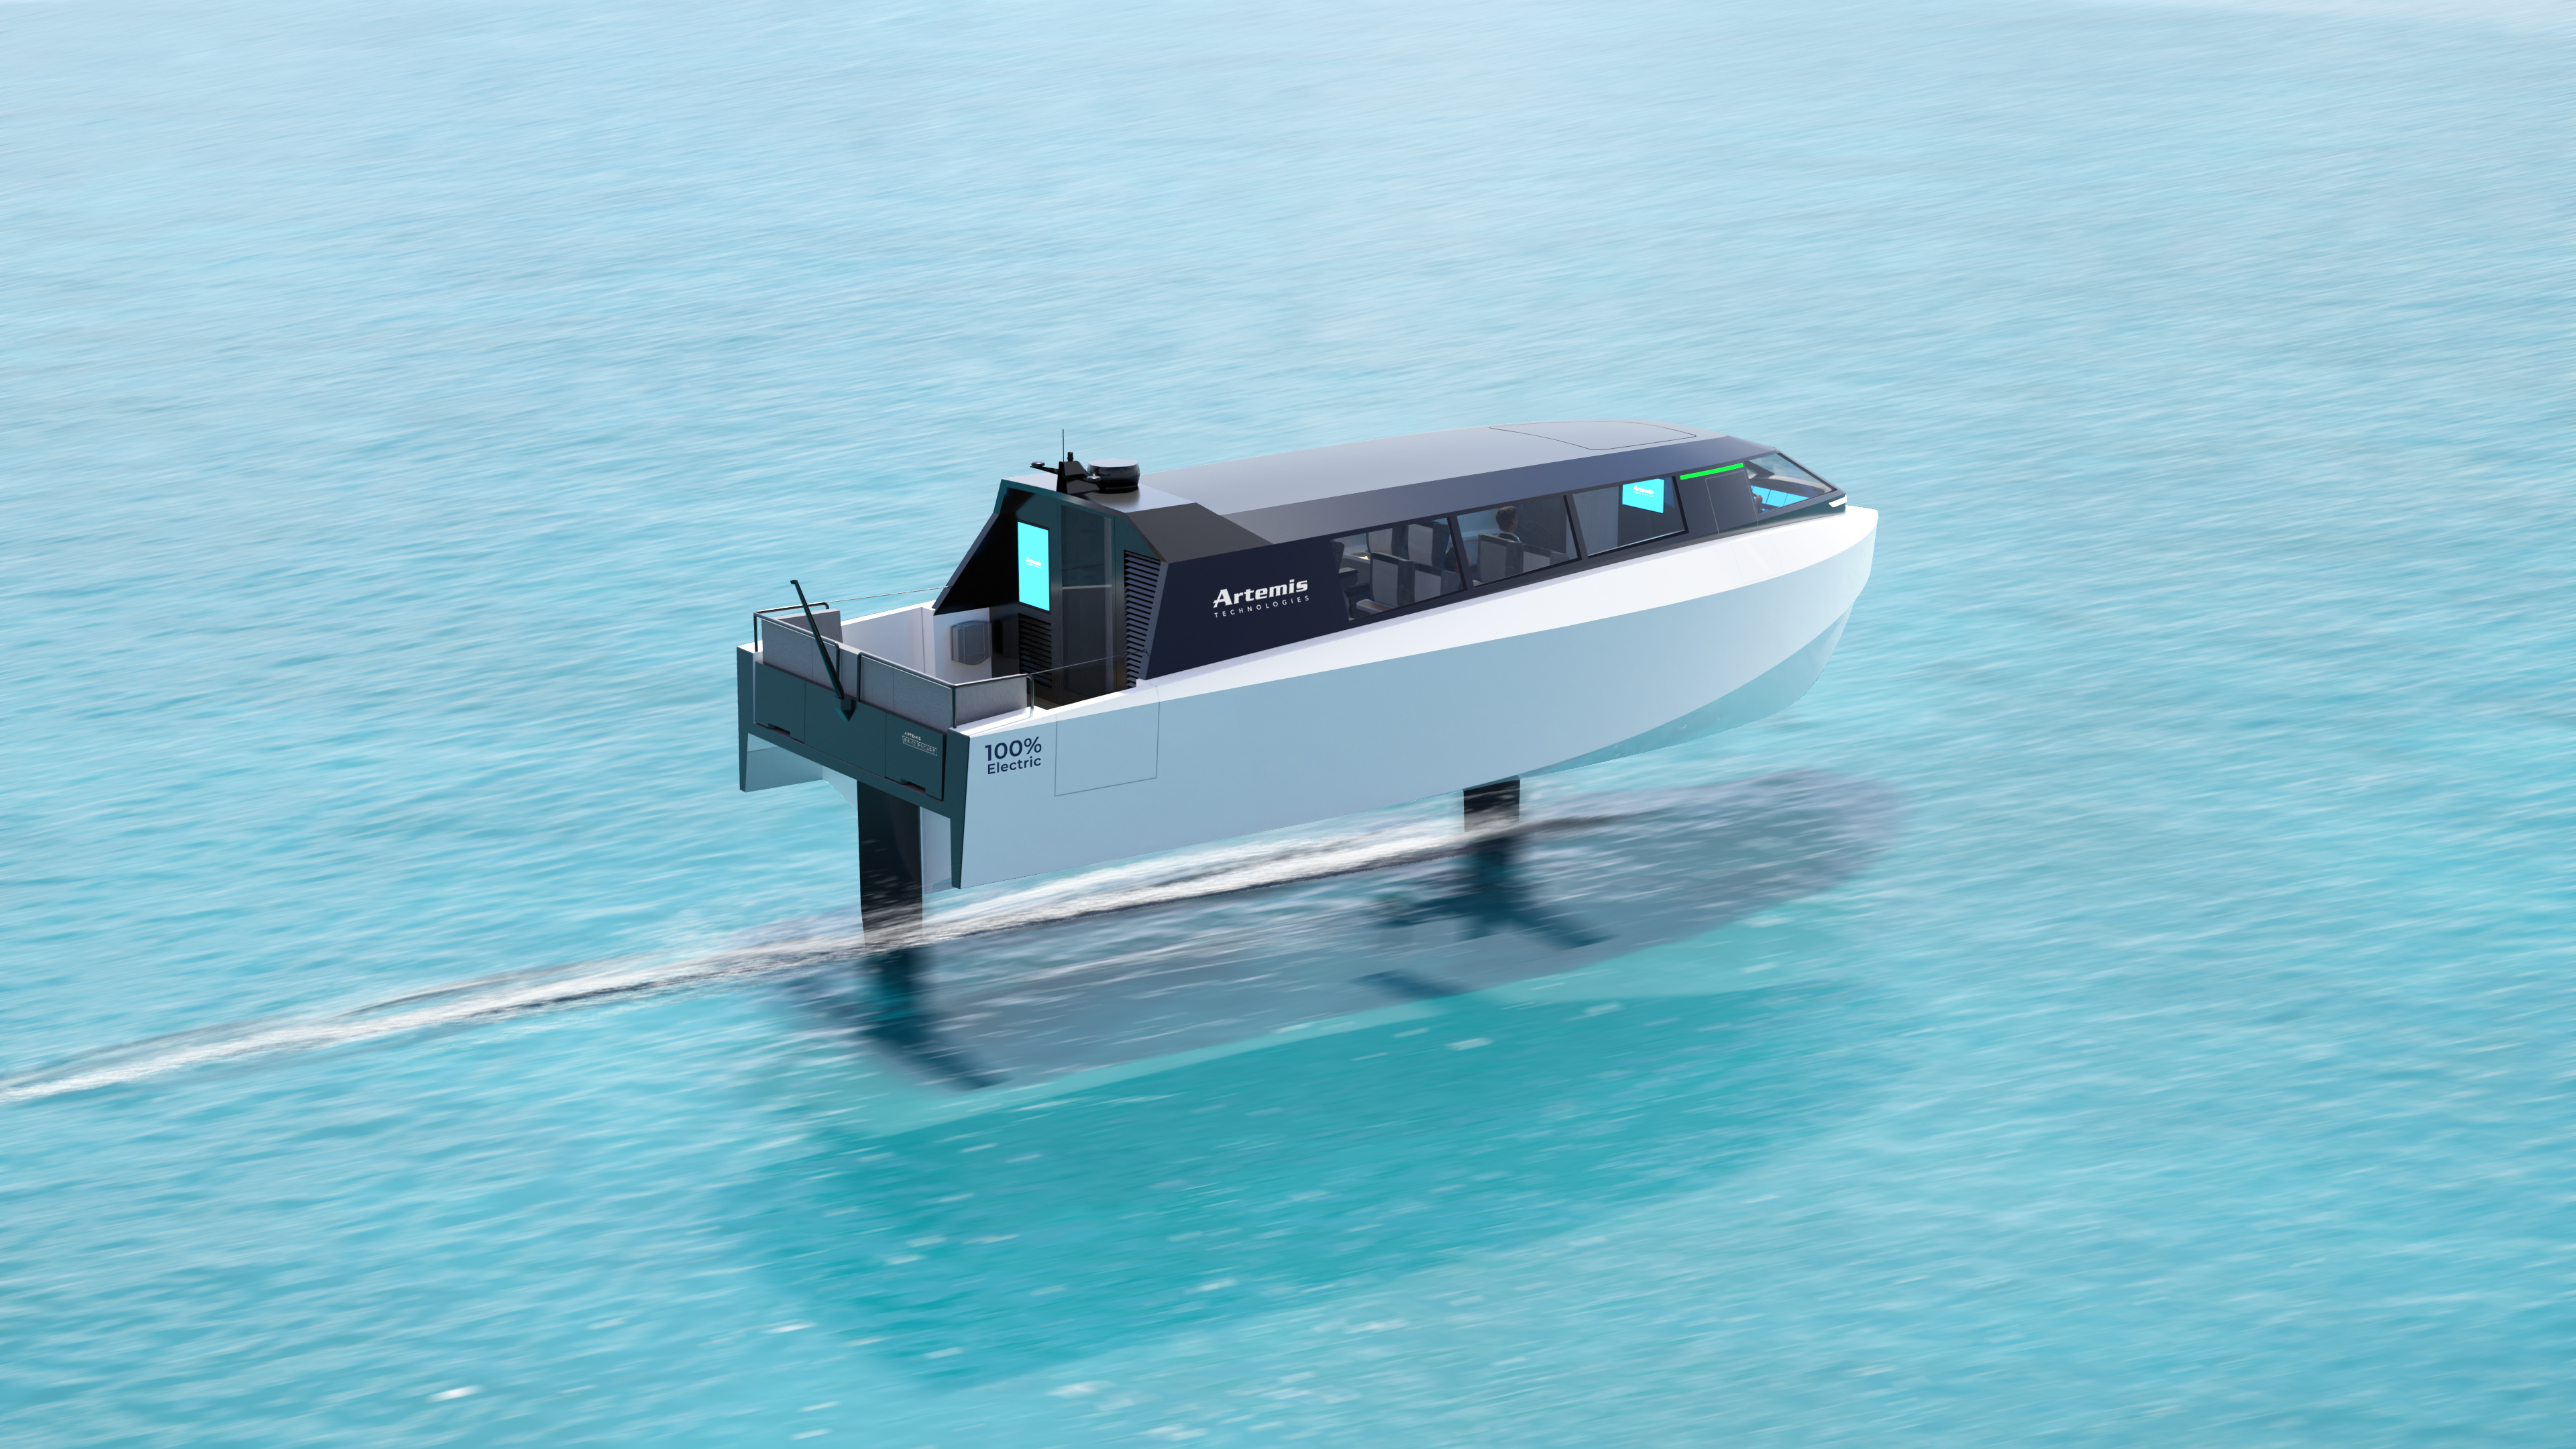 A luxury water taxi foiling in clear blue water